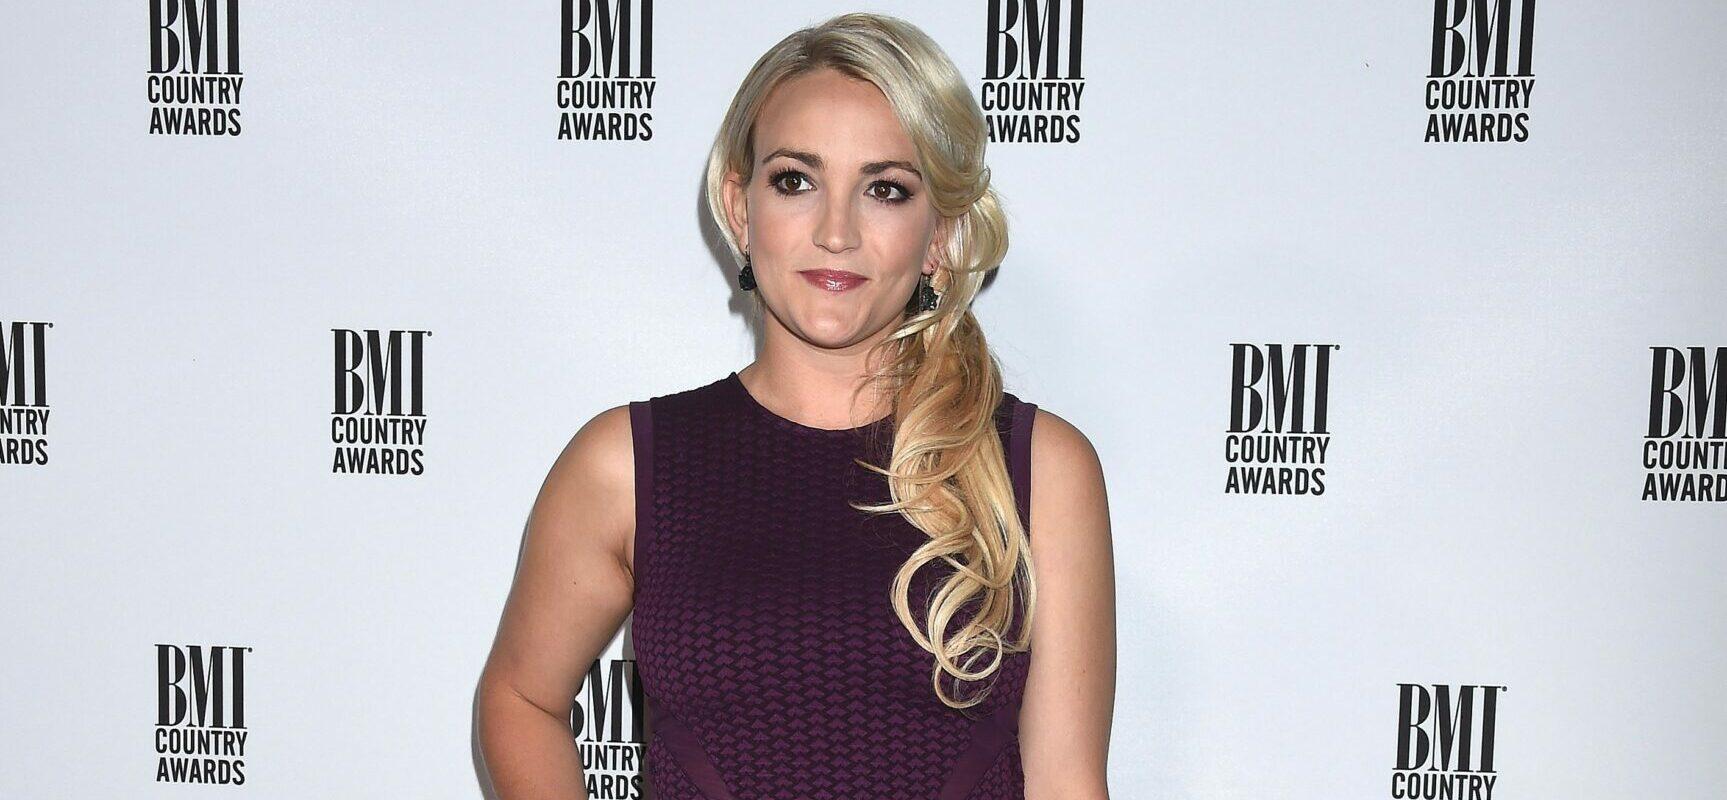 Britney Spears’ Sister Jamie Lynn Spears Quits ‘I’m A Celebrity’